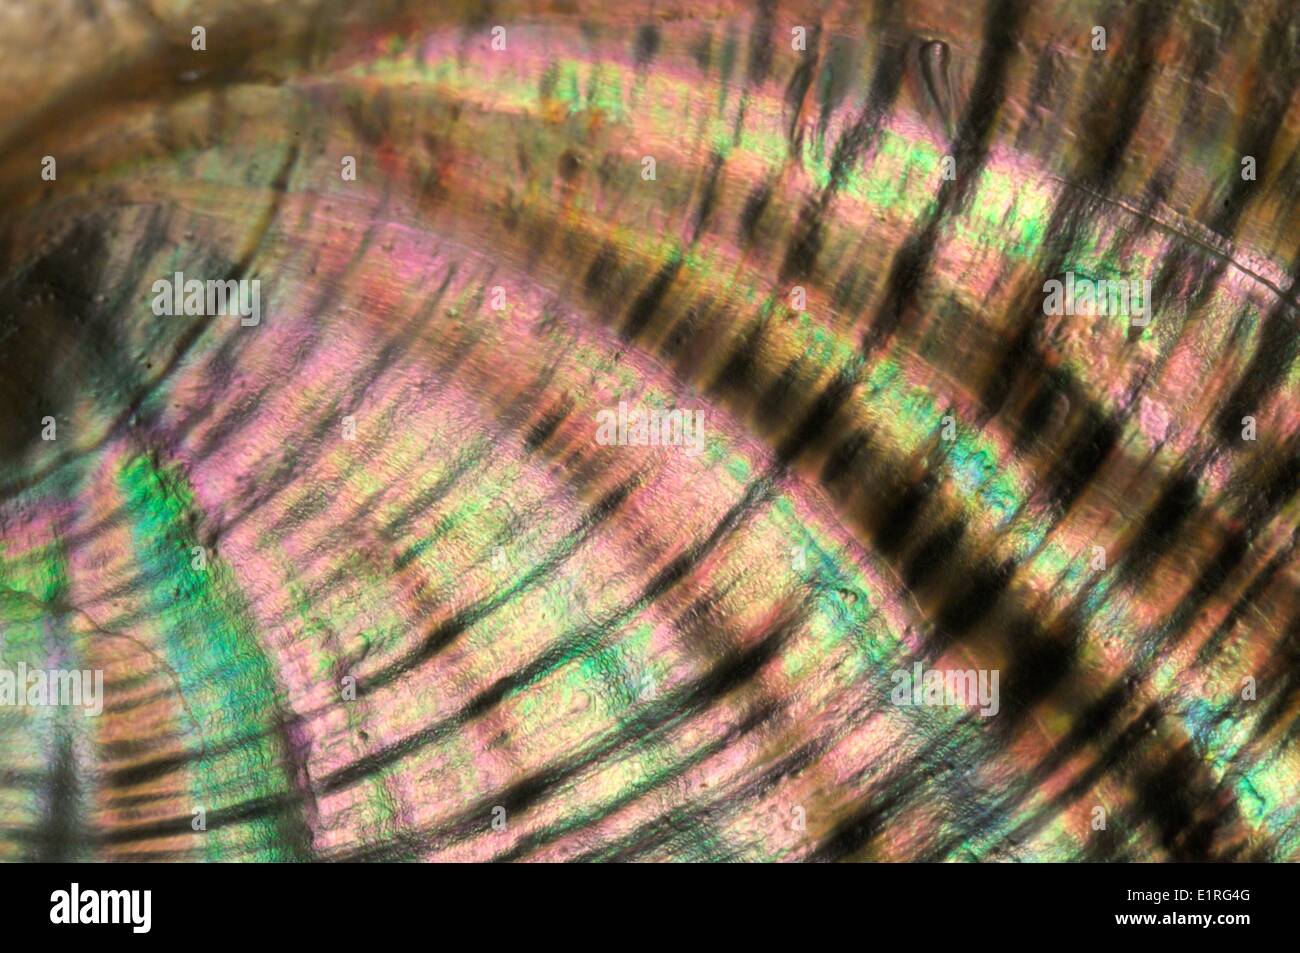 Artistic image of the iridescent nacre inside an Abalone shell Stock Photo